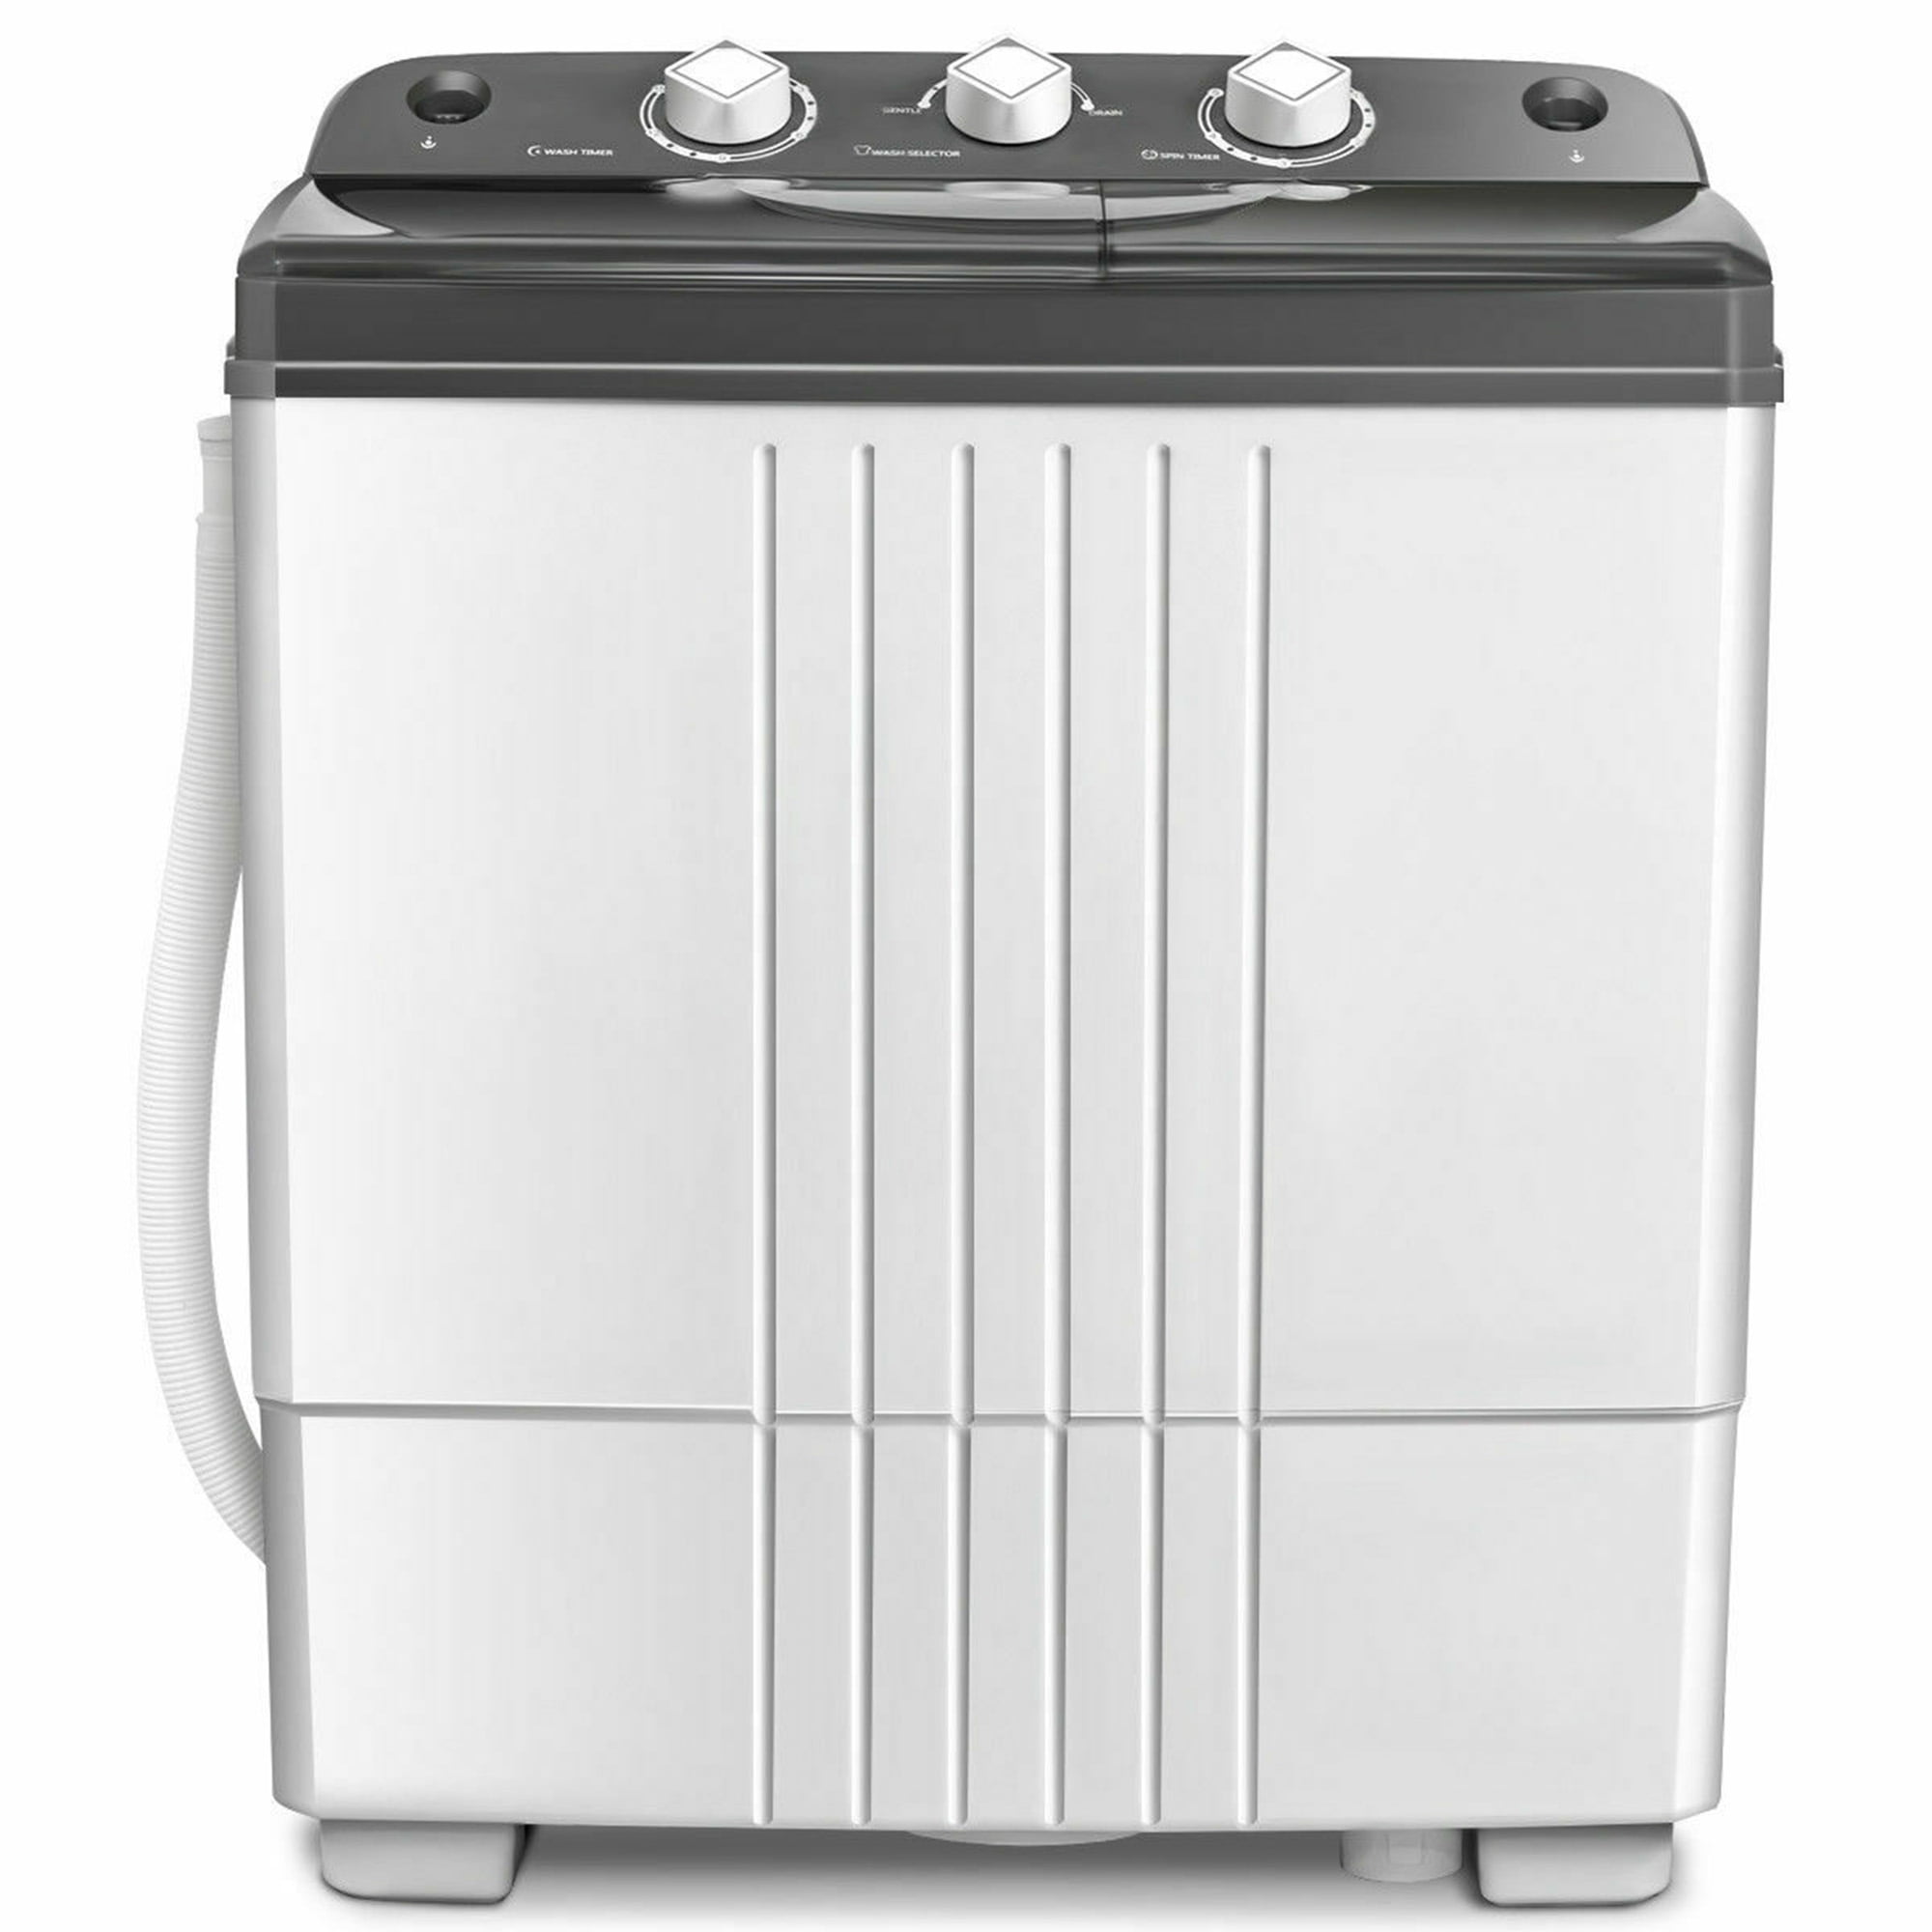  Homguava 20Lbs Capacity Portable Washing Machine Washer and  Dryer Combo Twin Tub Laundry 2 In 1 Washer(12Lbs) & Spinner(8Lbs) Built-in  Gravity Drain Pump,for Apartment,Dorms,RV Camping (grey+white) : Appliances